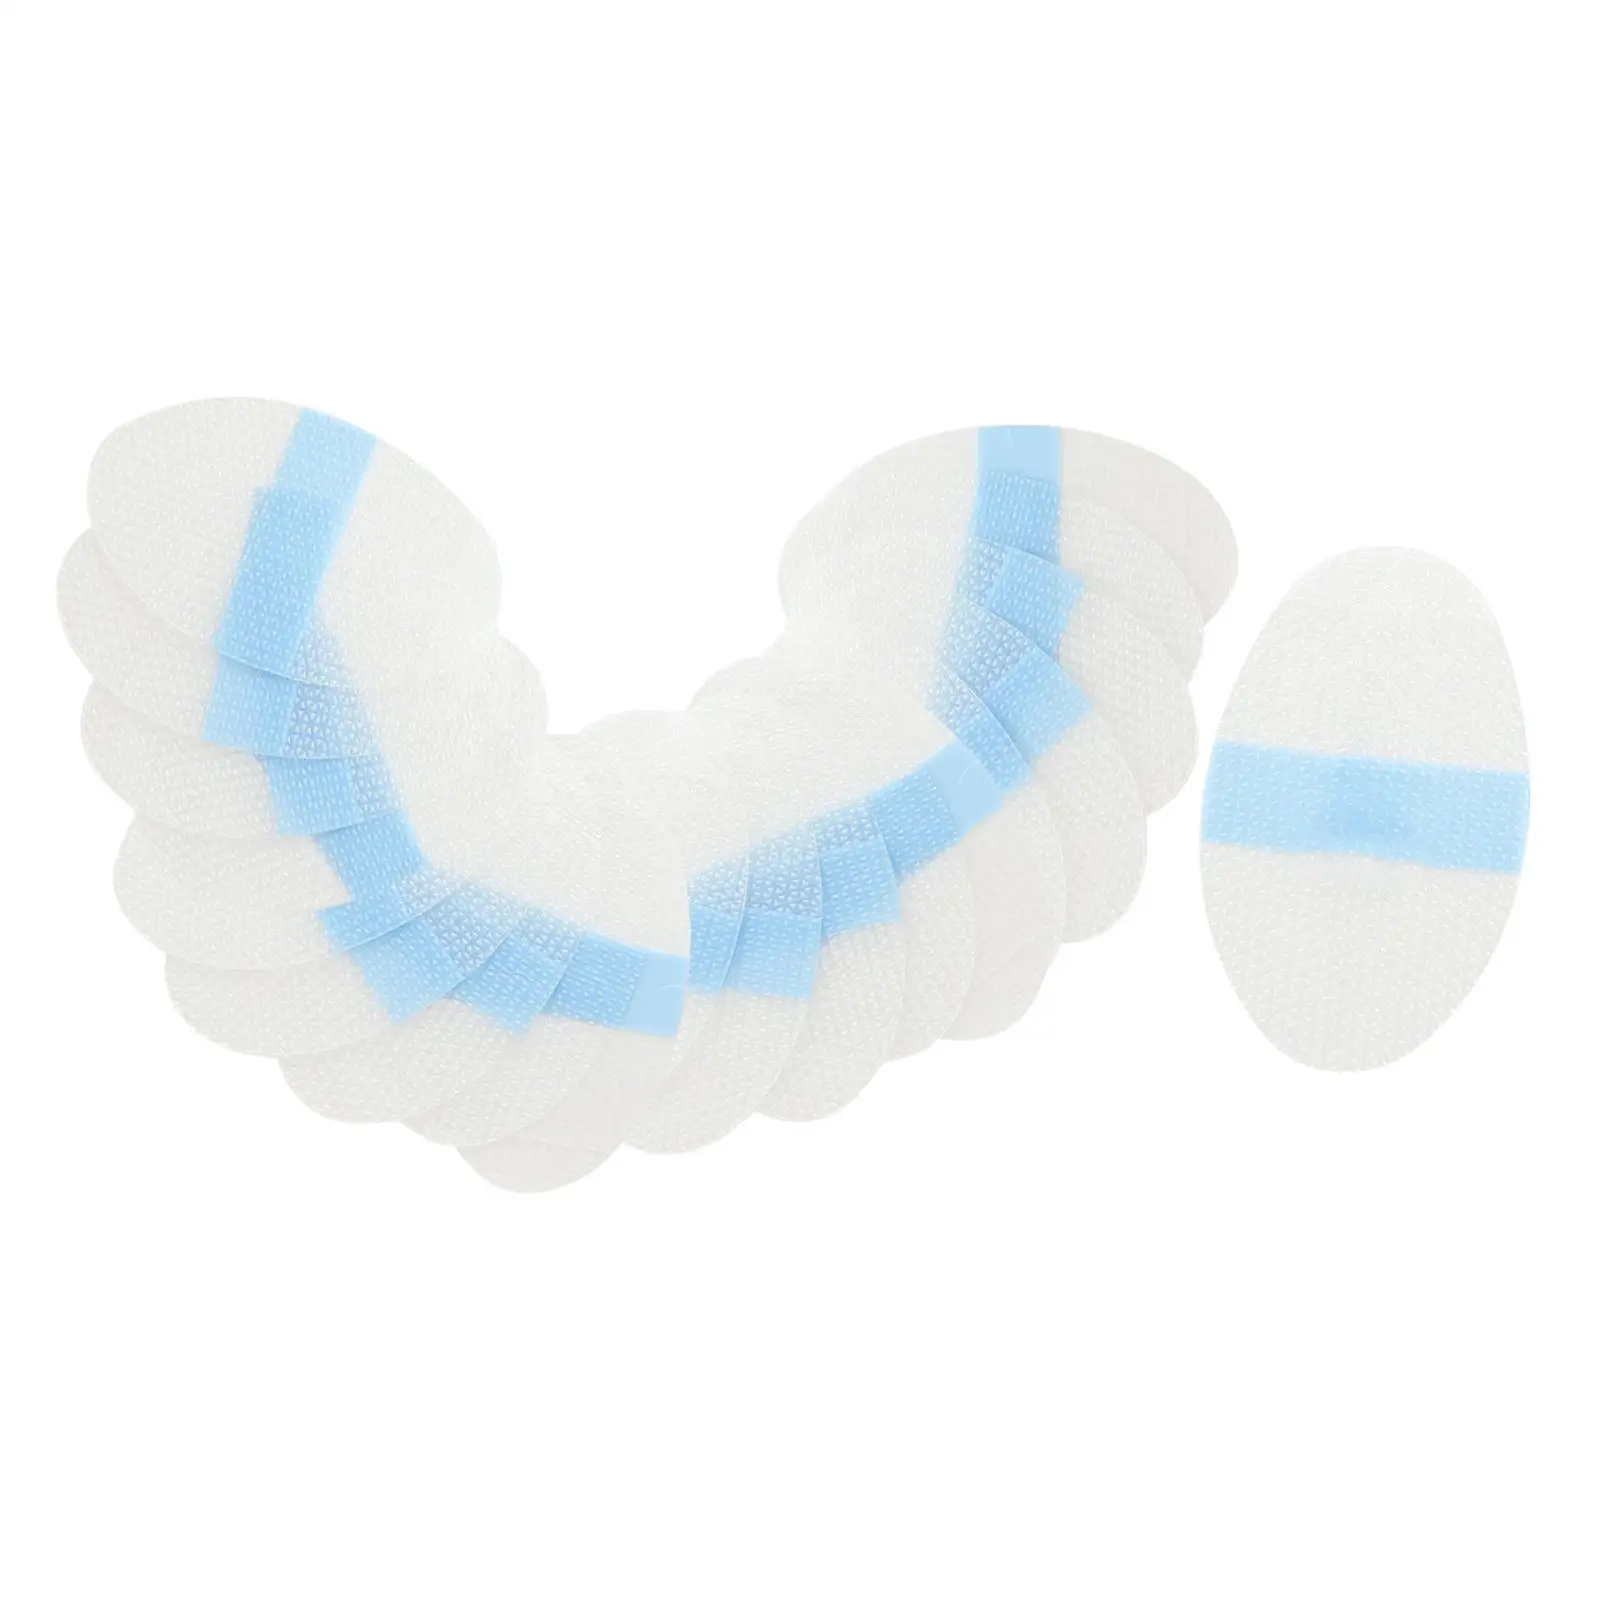 20 Pieces Waterproof Ear Stickers Ear Covers ear Protectors for Shower Swimming Water Adults Children